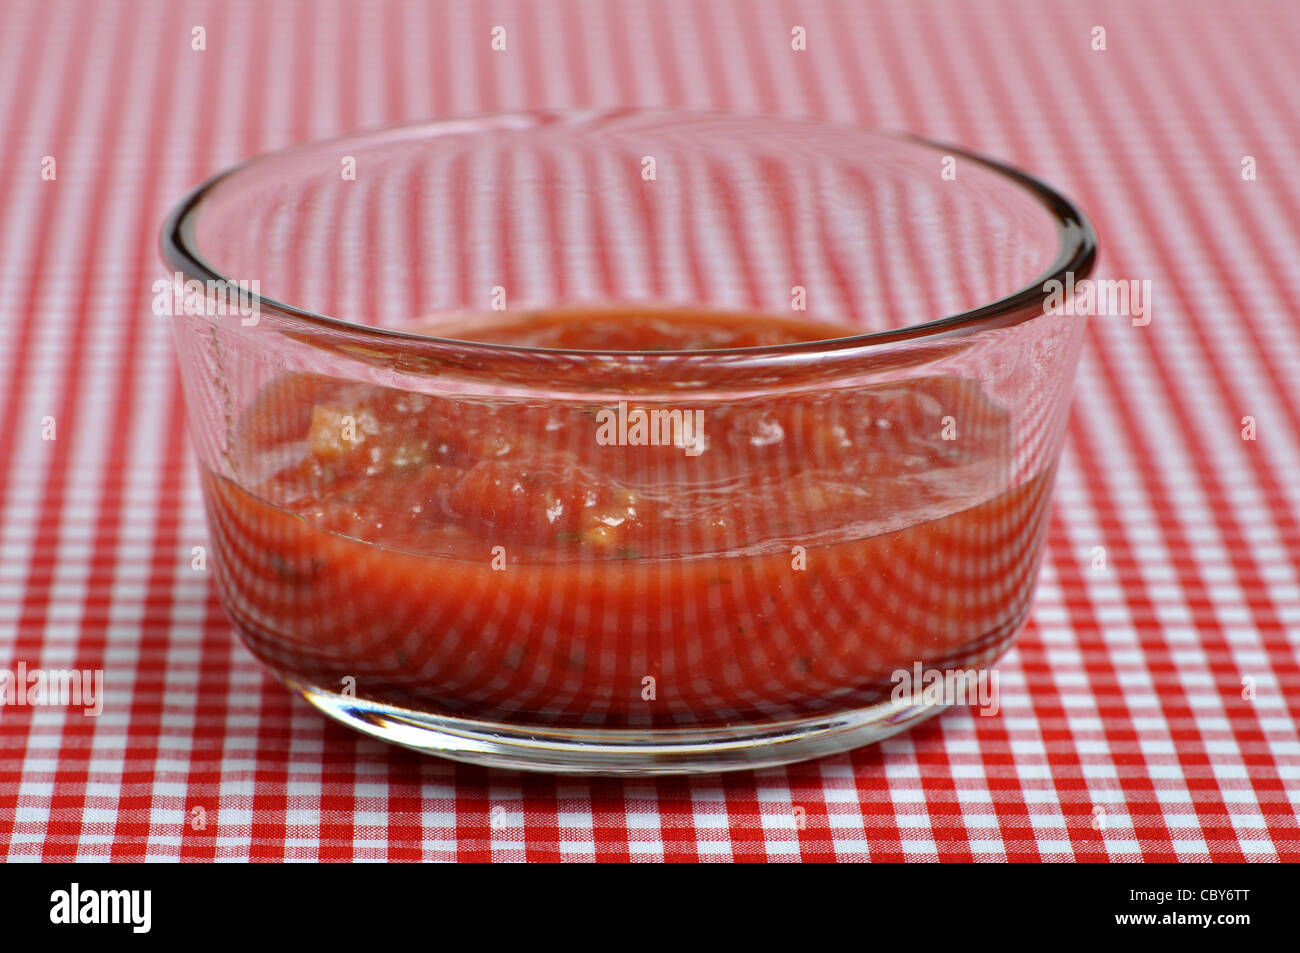 A small dish of salsa sits on a red and white checker table cloth. Stock Photo